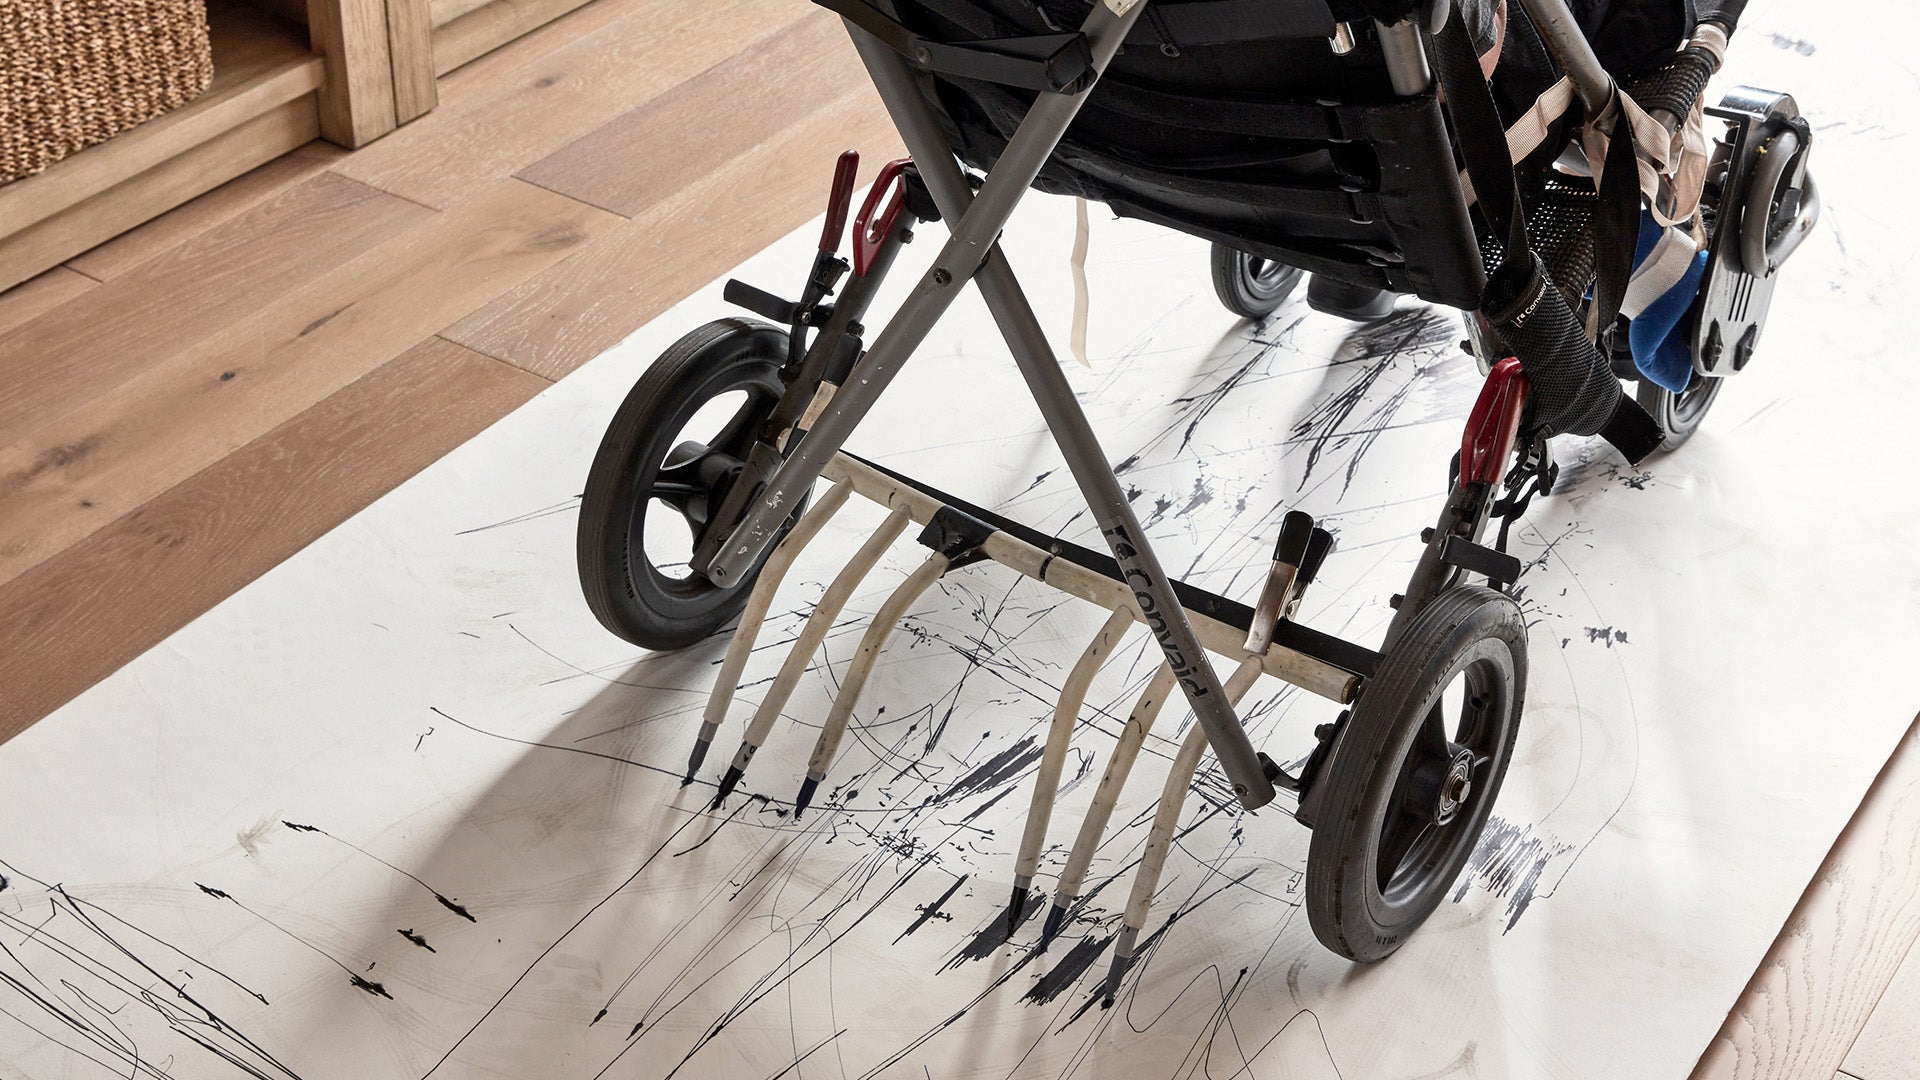 ArtLifting artist Eric Santamaria from Los Angeles, is seated in his adaptive wheelchair with black markers attached to the back wheels. Eric is using his adaptive chair to make marks with black ink on a canvas laying on the floor. Photo courtesy Pottery Barn,